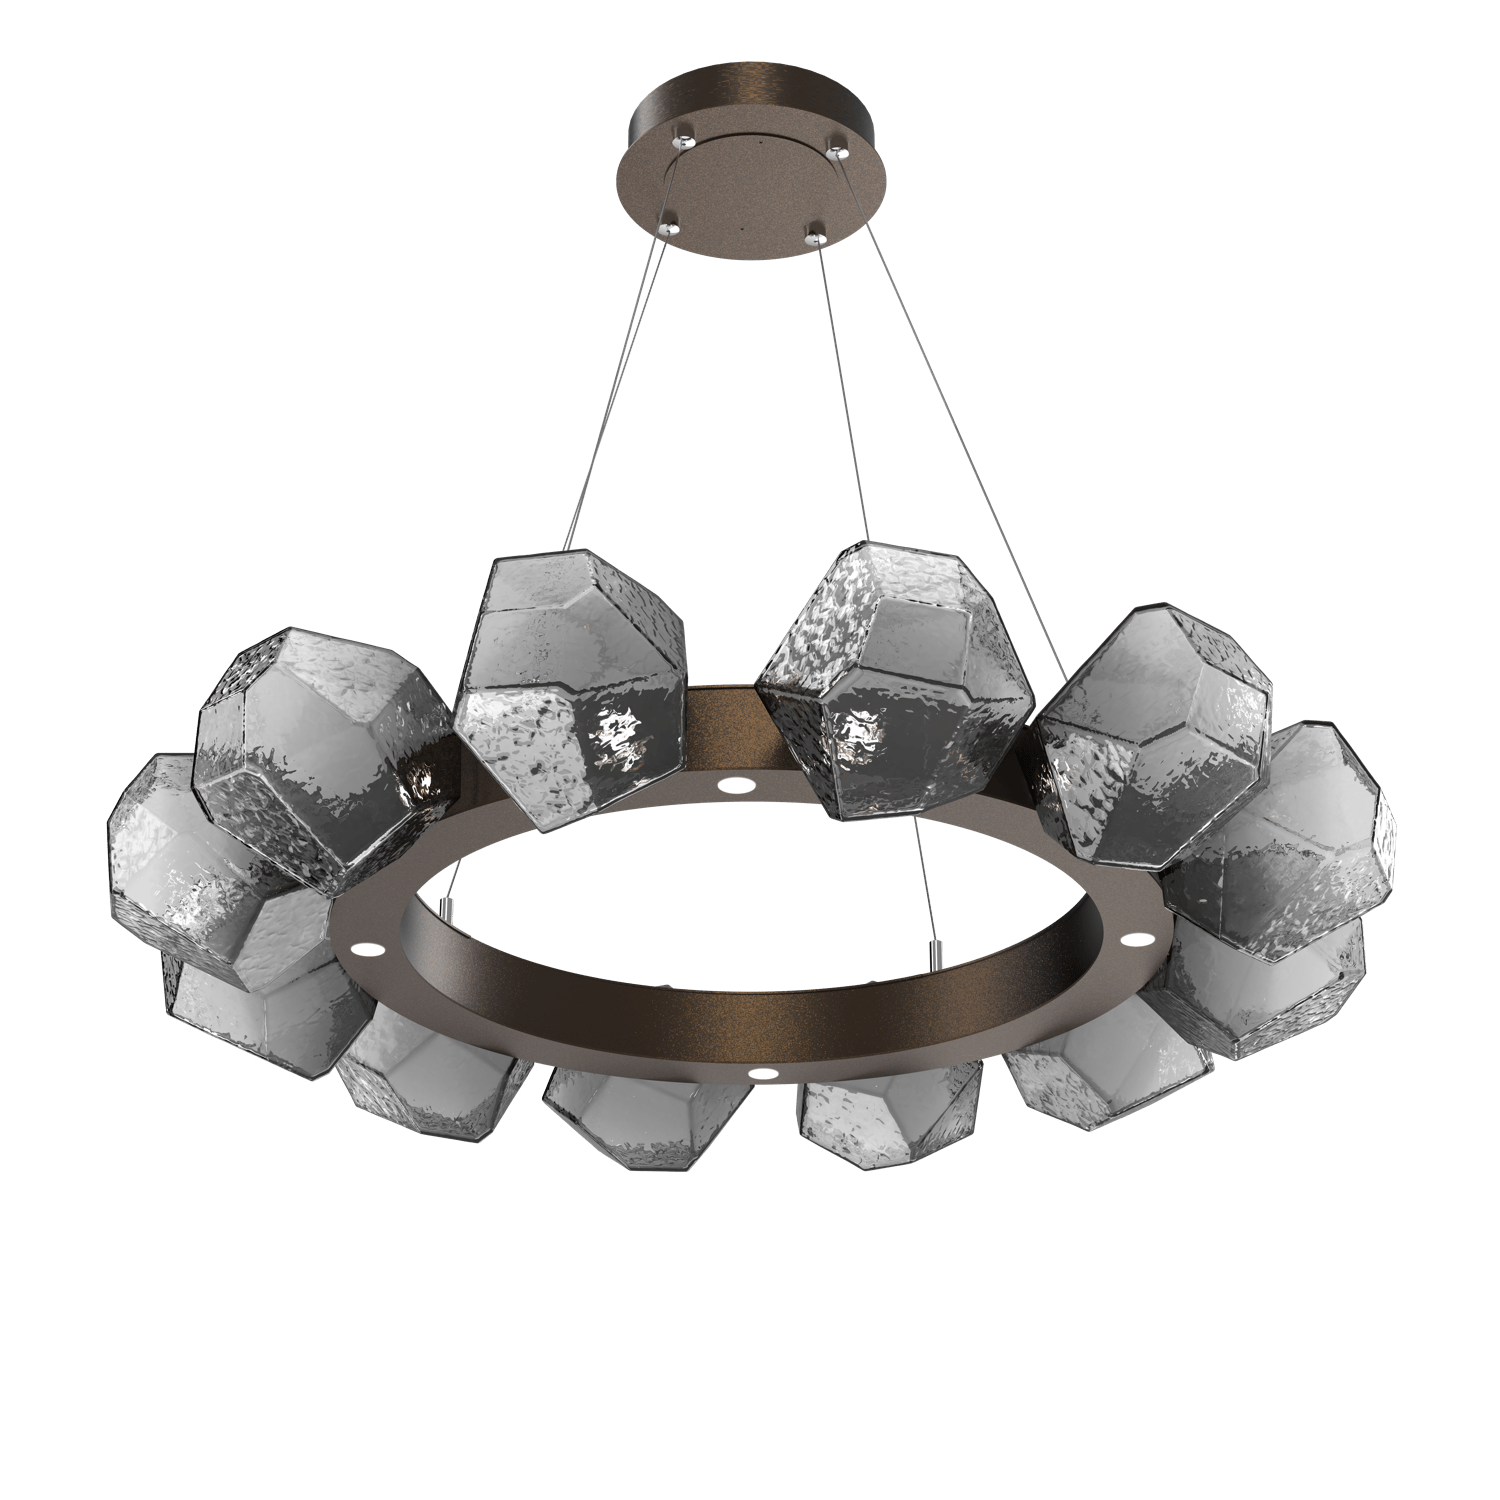 CHB0039-36-FB-S-Hammerton-Studio-Gem-36-inch-radial-ring-chandelier-with-flat-bronze-finish-and-smoke-blown-glass-shades-and-LED-lamping